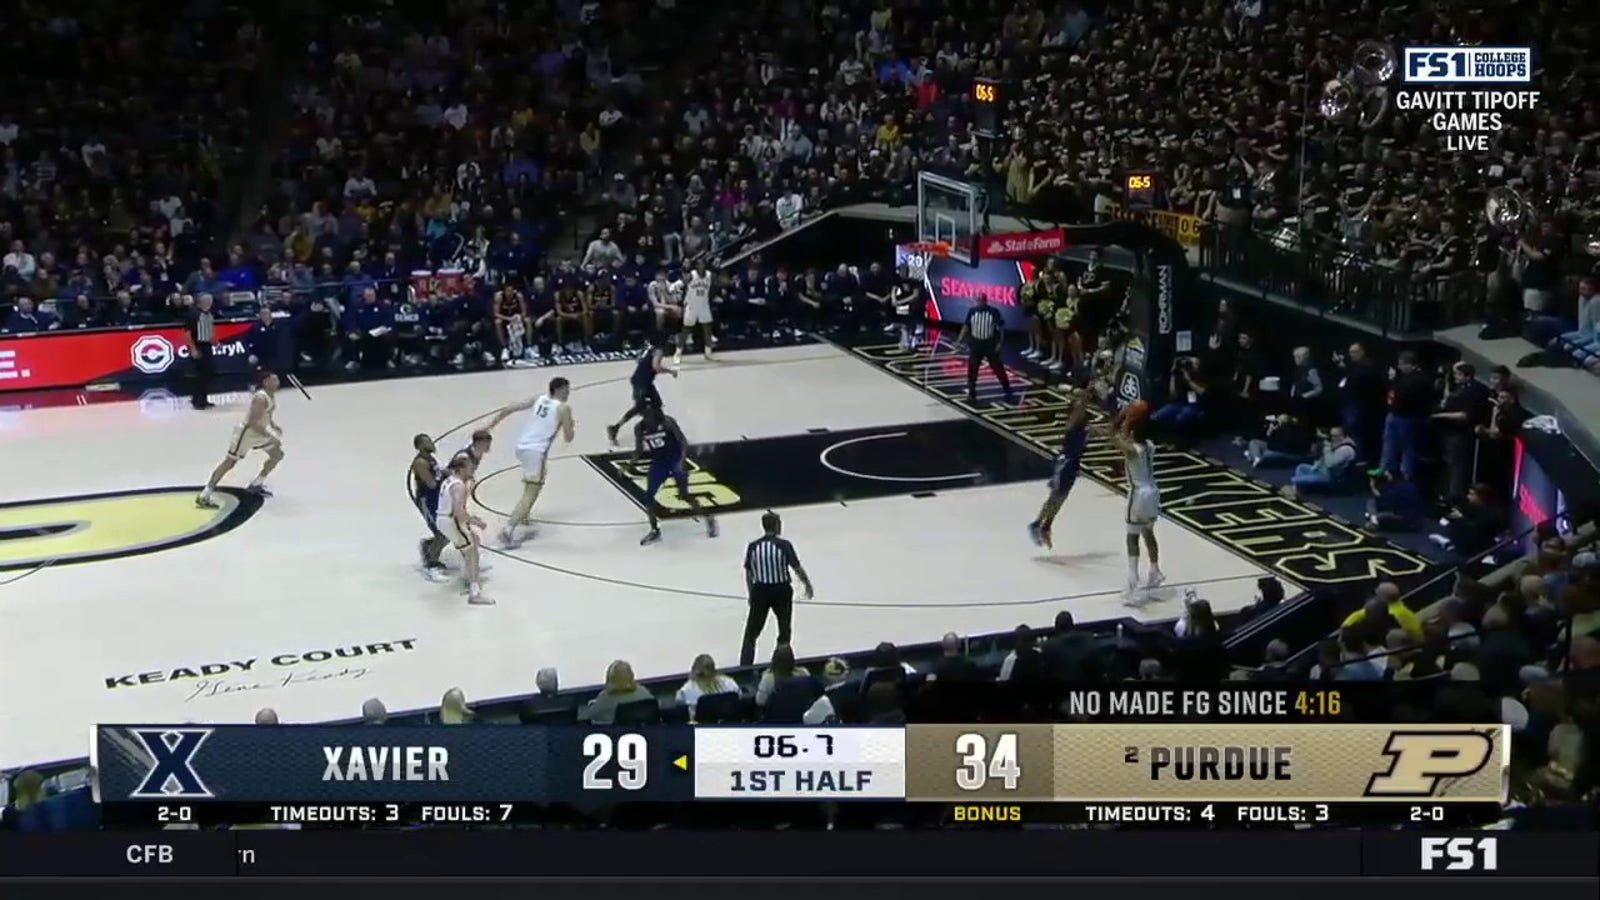 Myles Colvin drains a timely 3-pointer to help Purdue grab momentum heading into halftime against Xavier